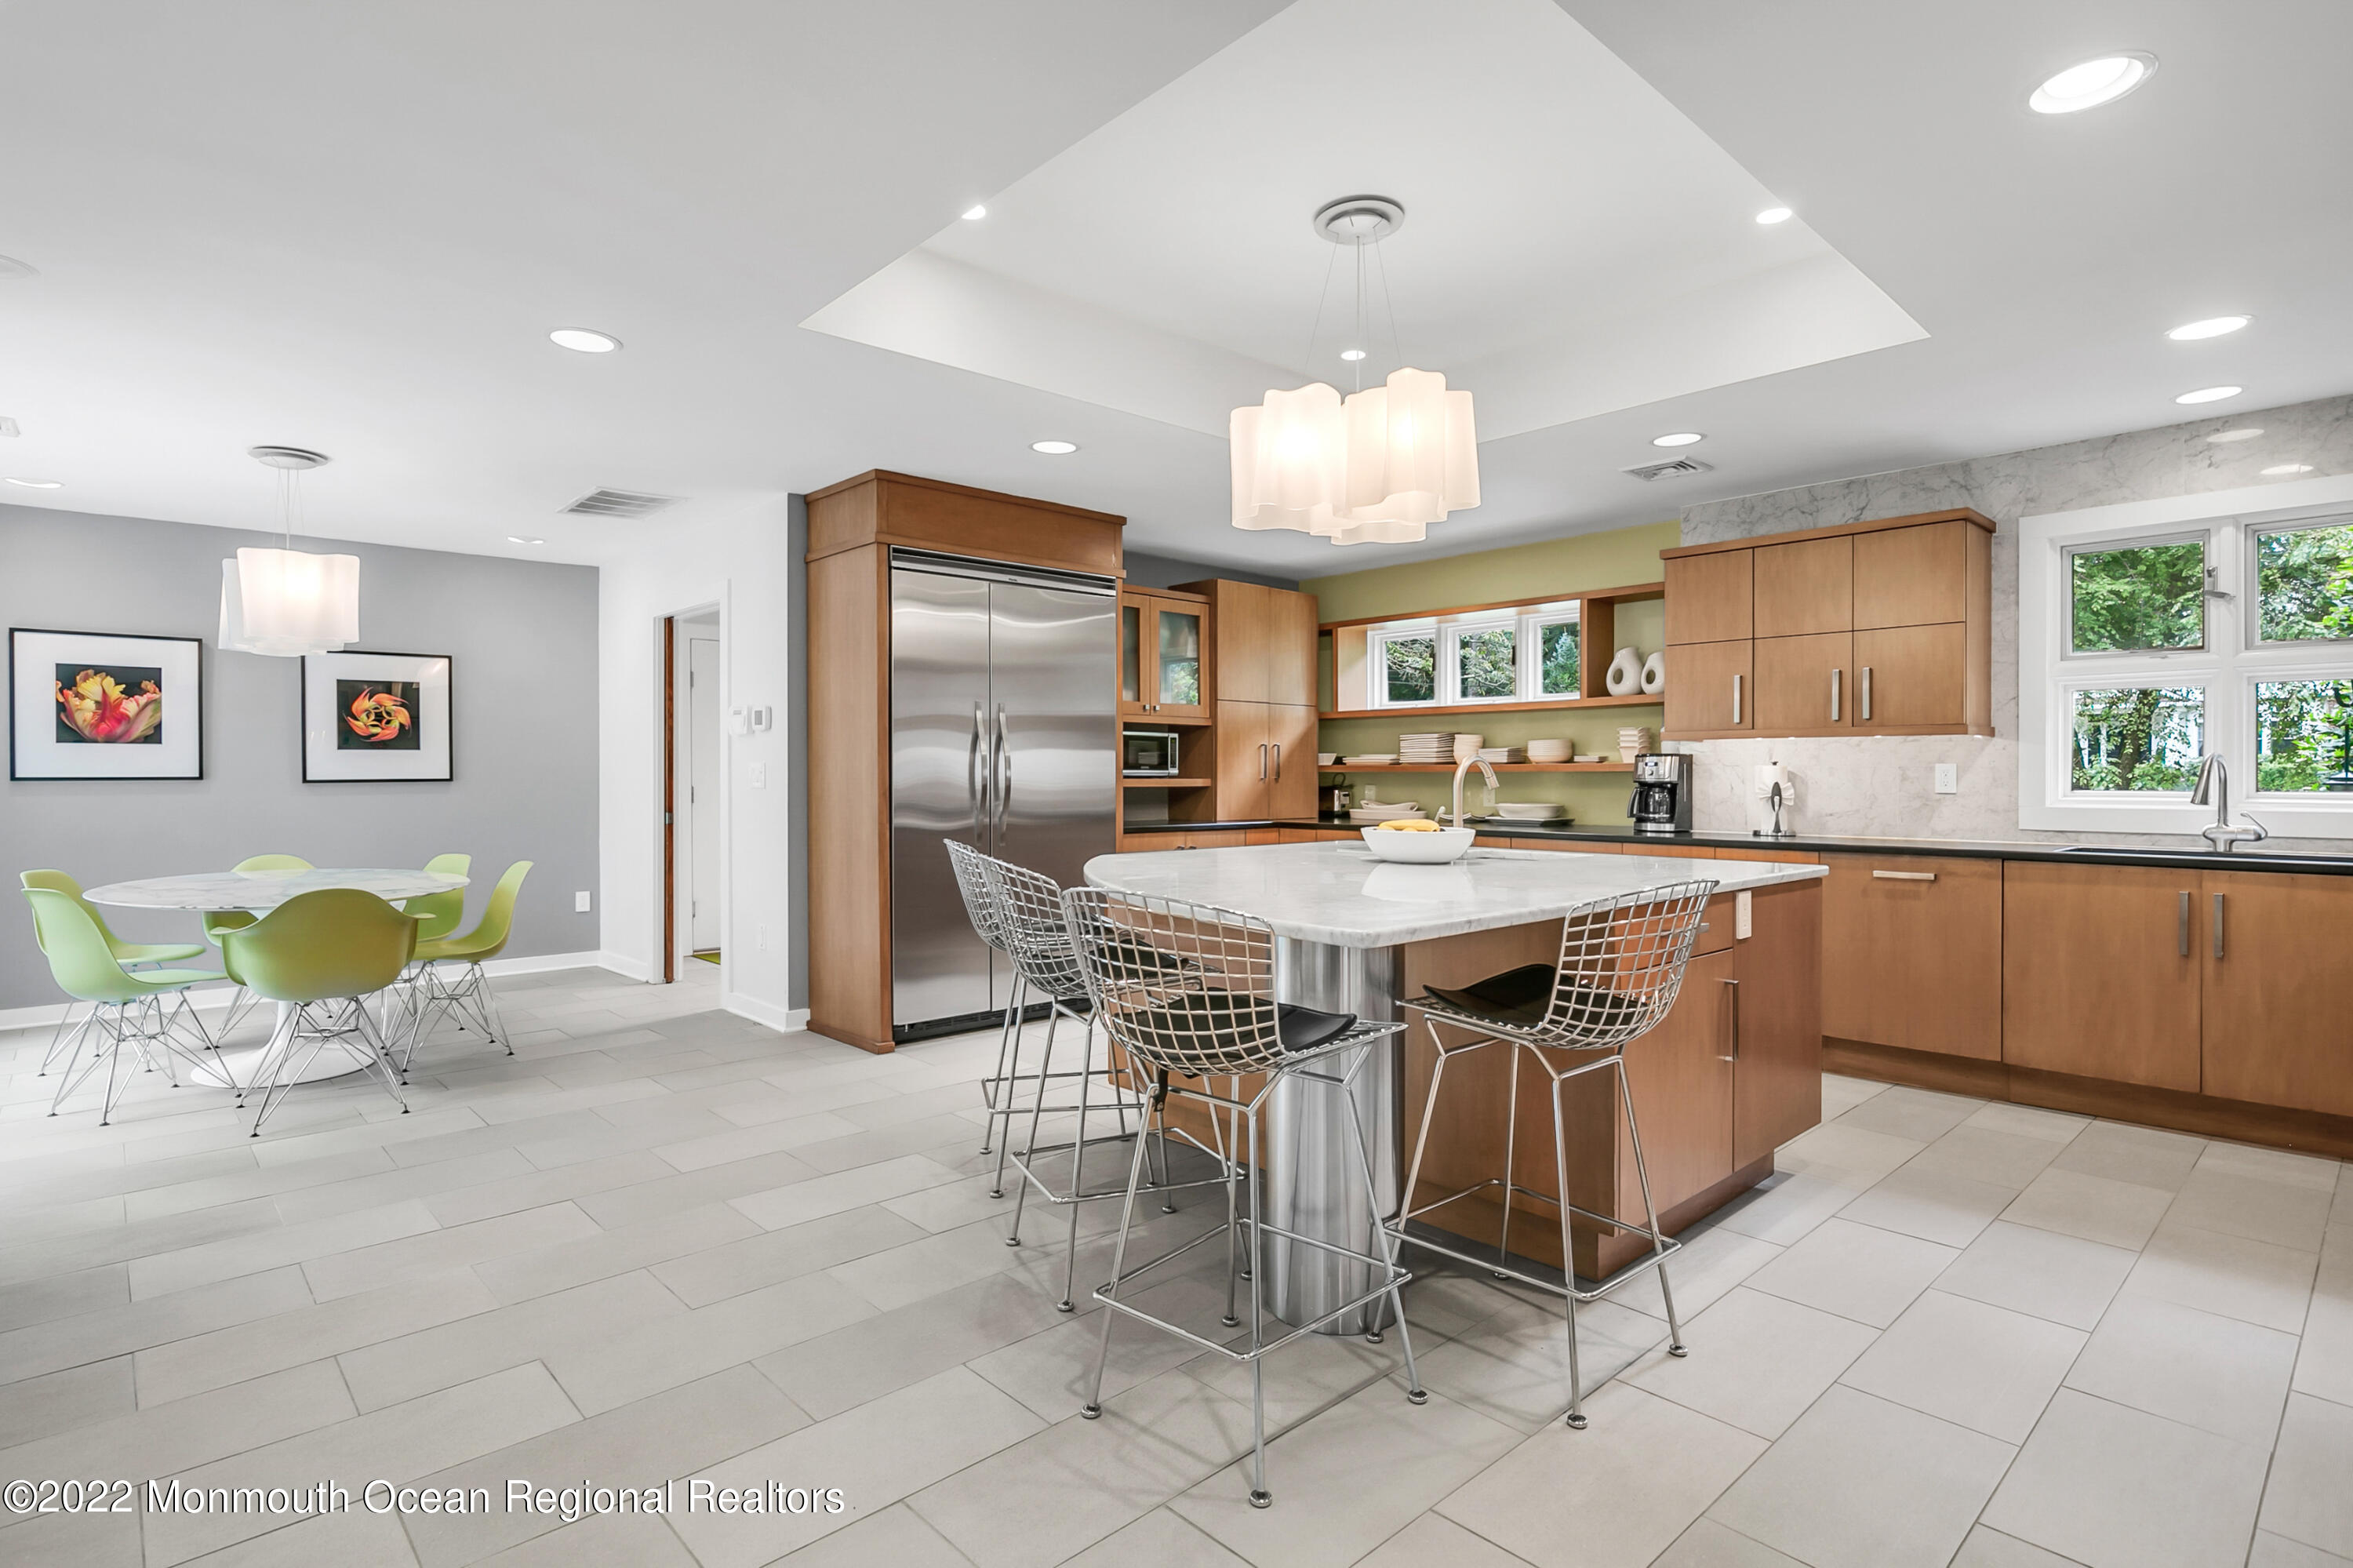 a kitchen with stainless steel appliances kitchen island granite countertop a sink and cabinets